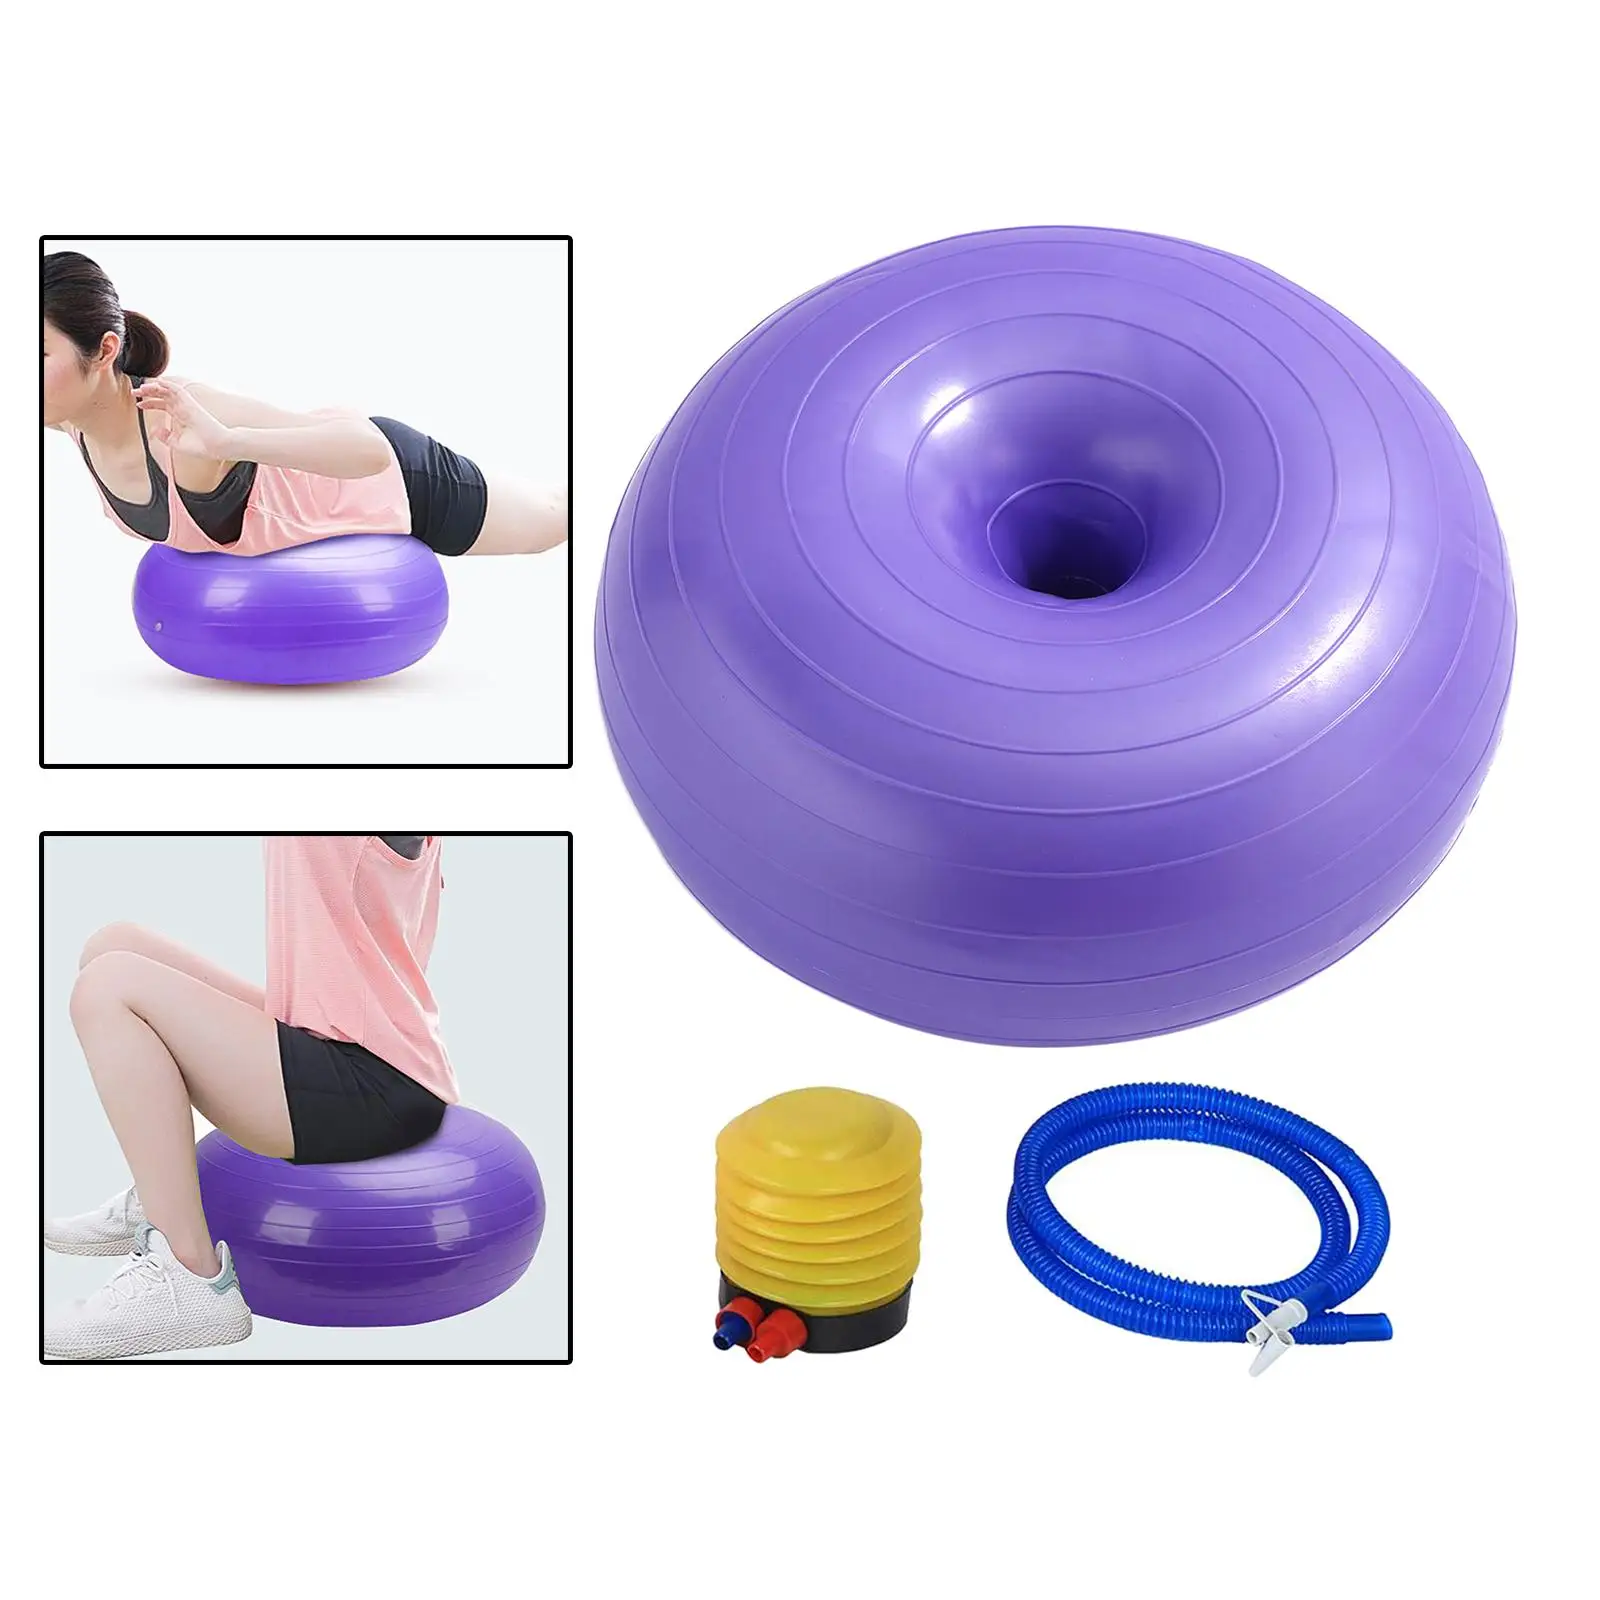 Exercise Ball - Extra Thick Yoga Ball with Quick Pump - Anti-Burst and Slip